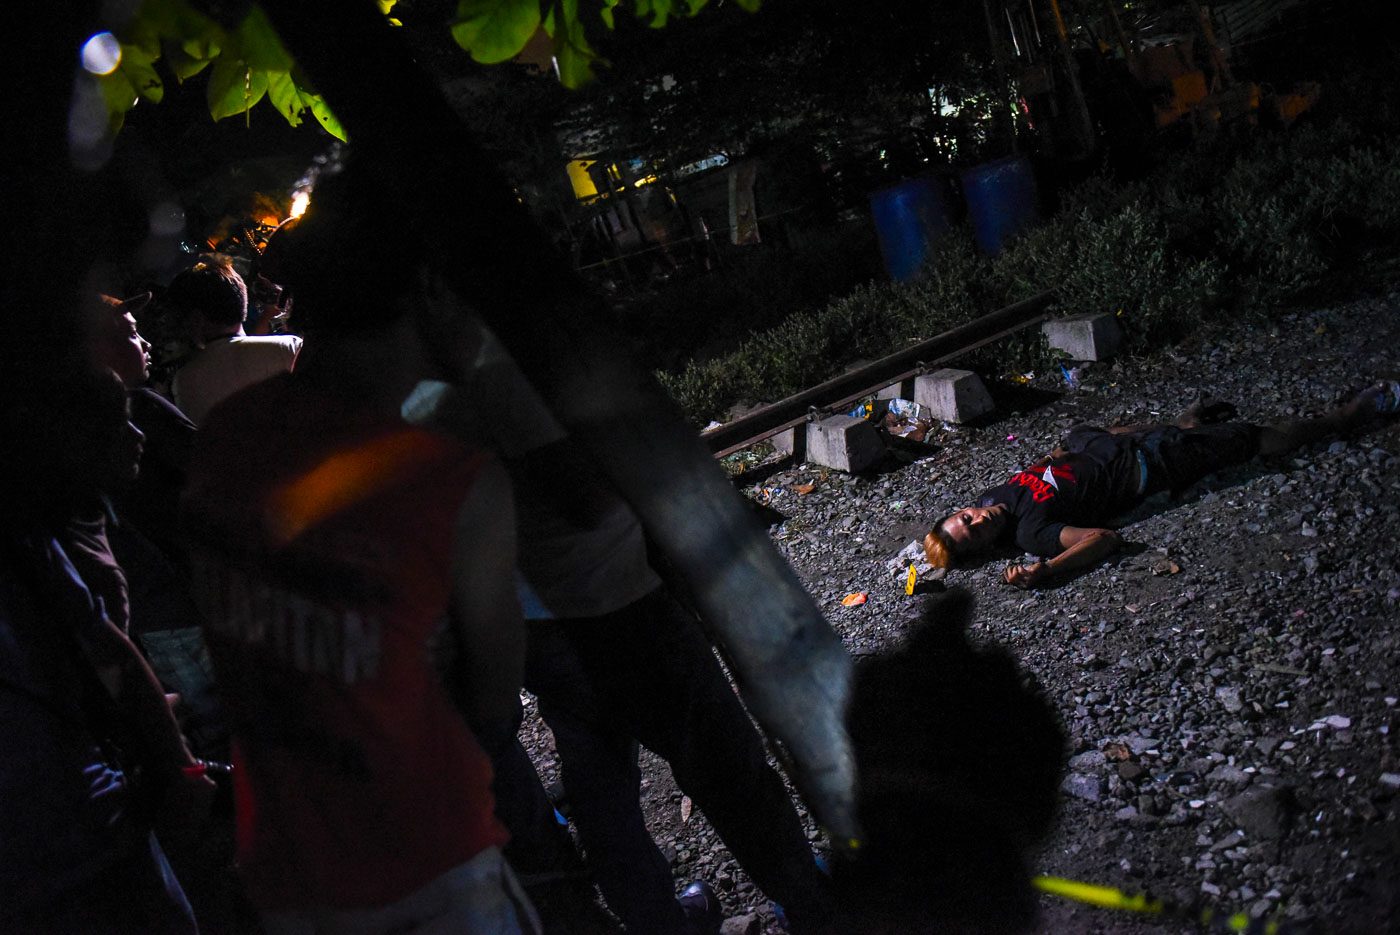 Cops are paid to kill in PH war on drugs – Amnesty Int’l